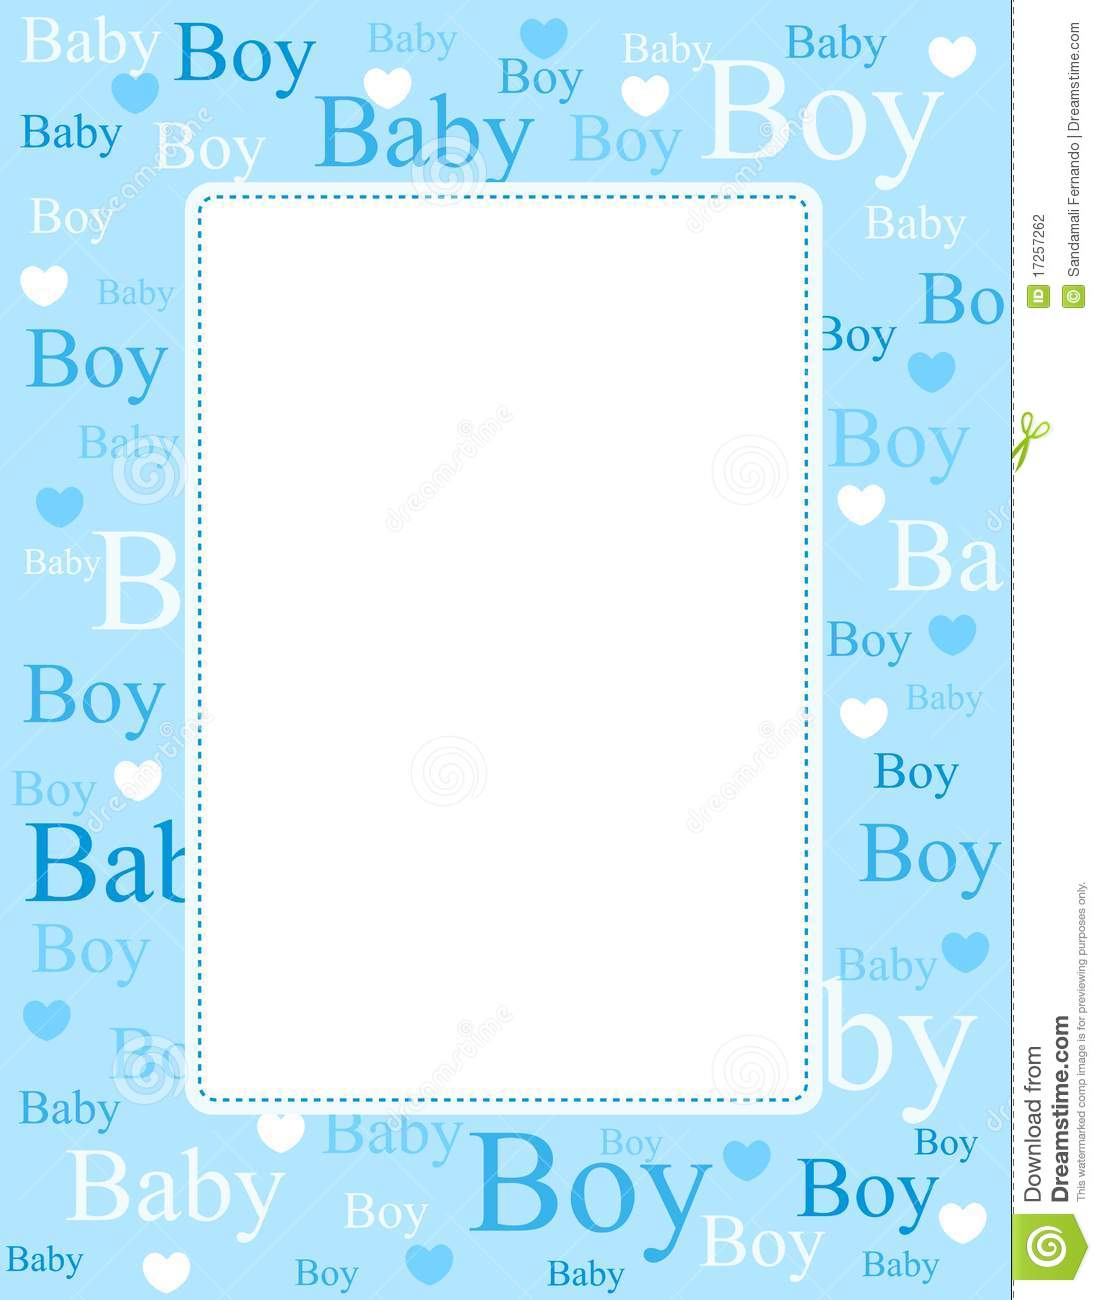 baby boy pictures free baby boy arrival card background 17257262jpg